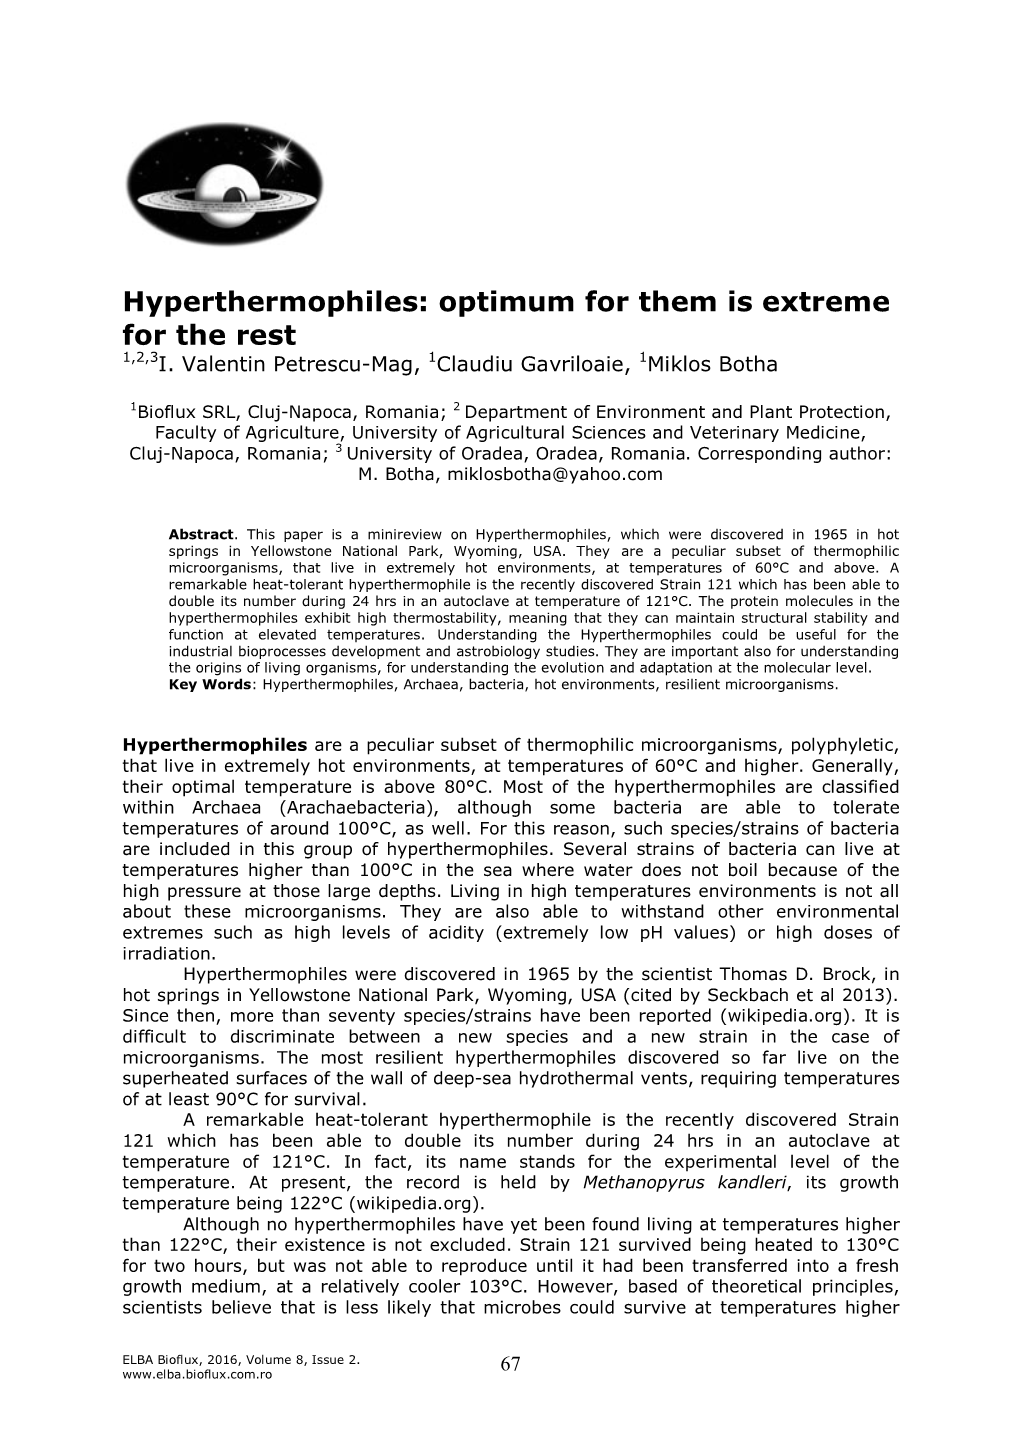 Hyperthermophiles: Optimum for Them Is Extreme for the Rest 1,2,3I